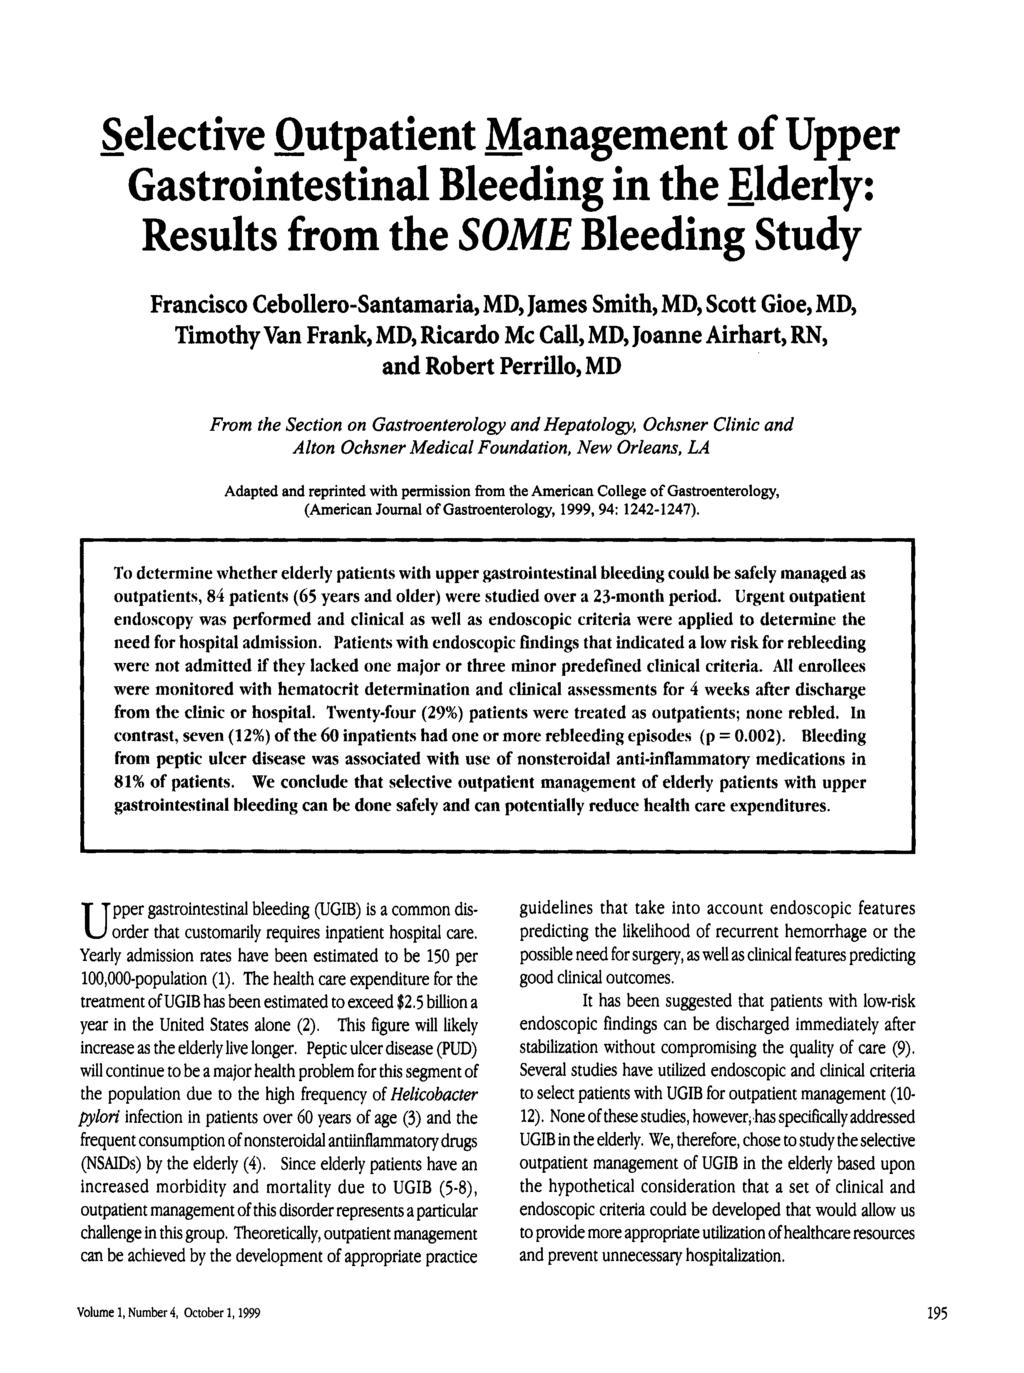 Selective Outpatient Management of Upper Gastrointestinal Bleeding in the Elderly: Results from the SOME Bleeding Study Francisco CebolleroSantamaria, MD, James Smith, MD, Scott Gioe, MD, Timothy Van